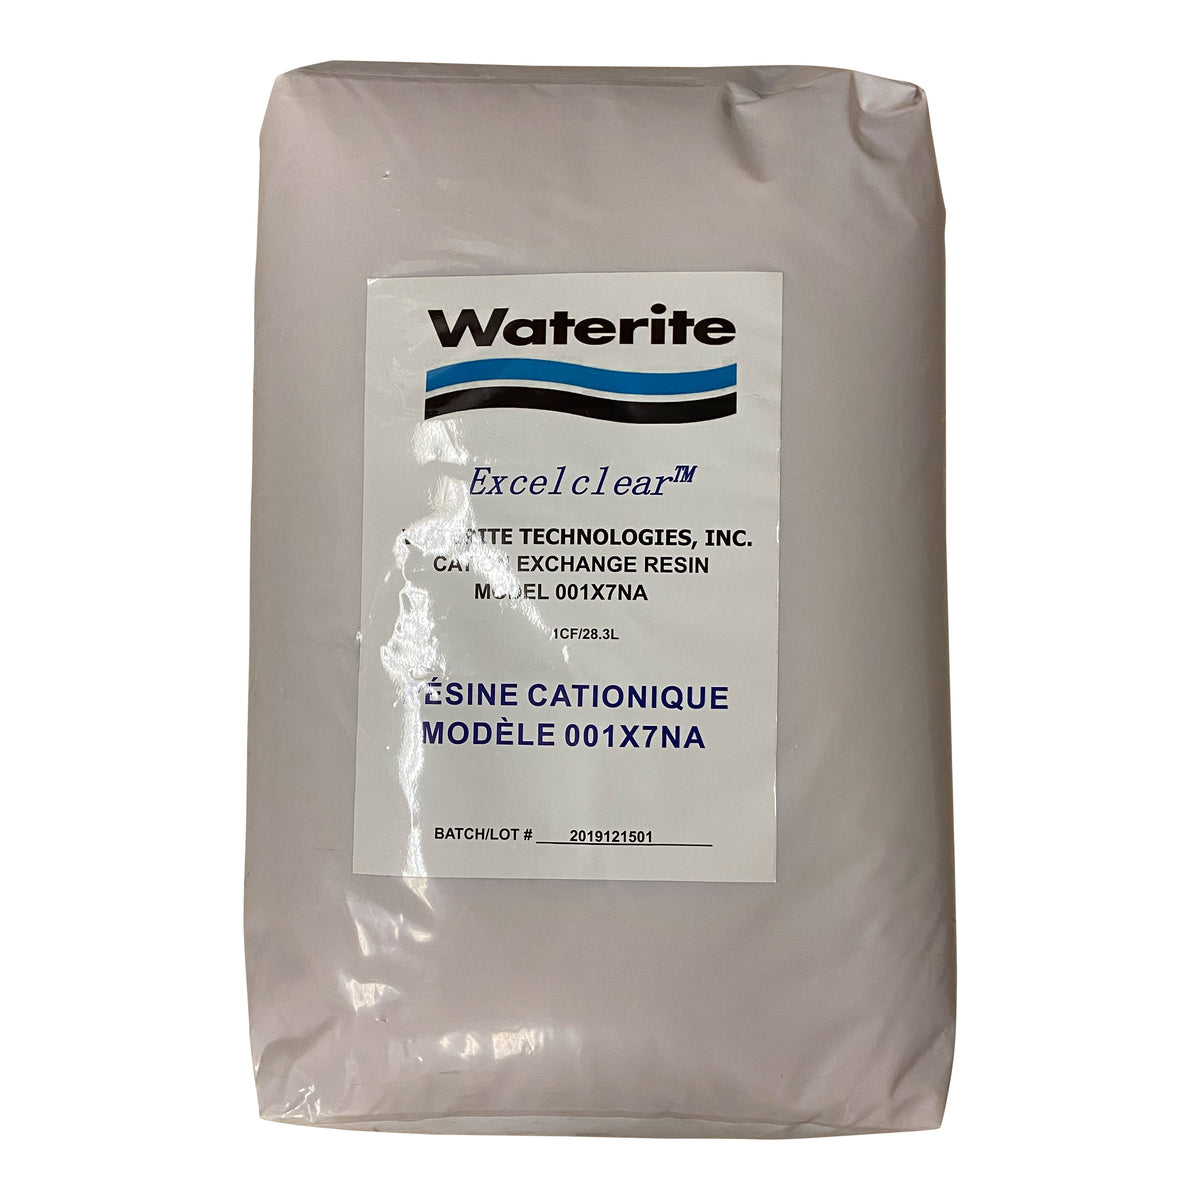 Excelclear Premium Grade Water Softener Media - 1 cubic foot